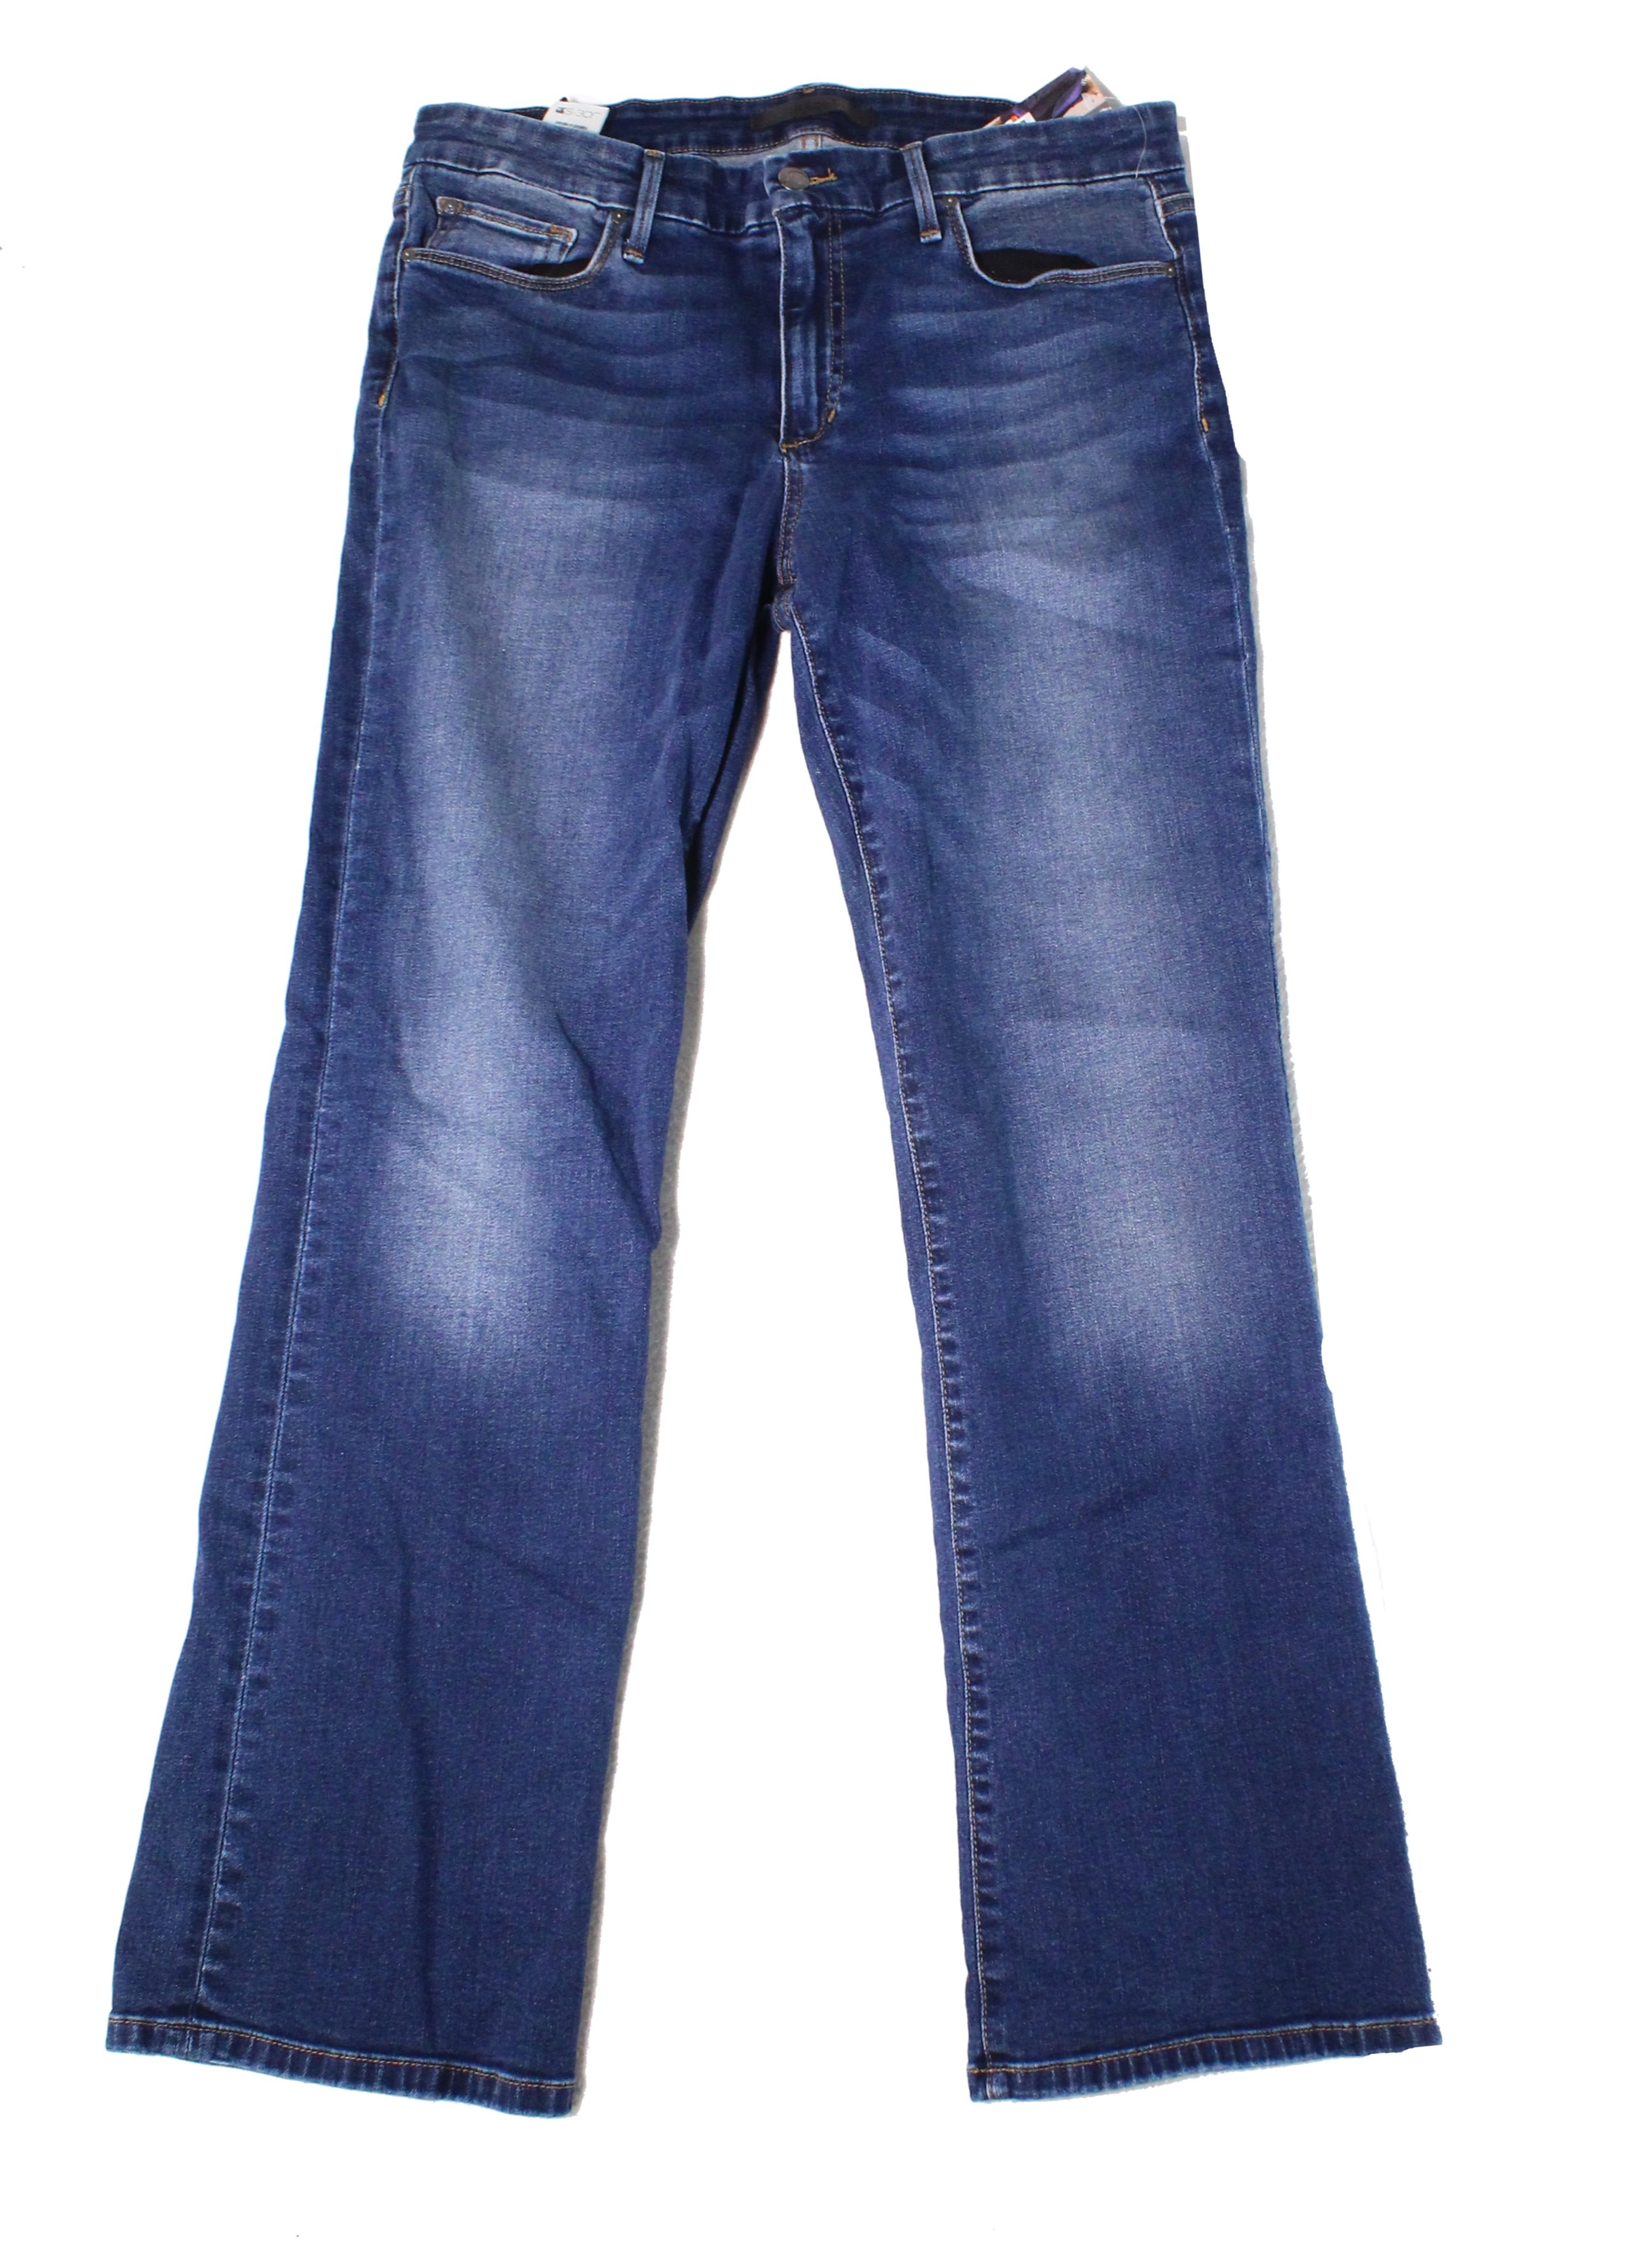 JOE'S Jeans - Womens Jeans Indigo Button-Front Flare Stretch 32 ...